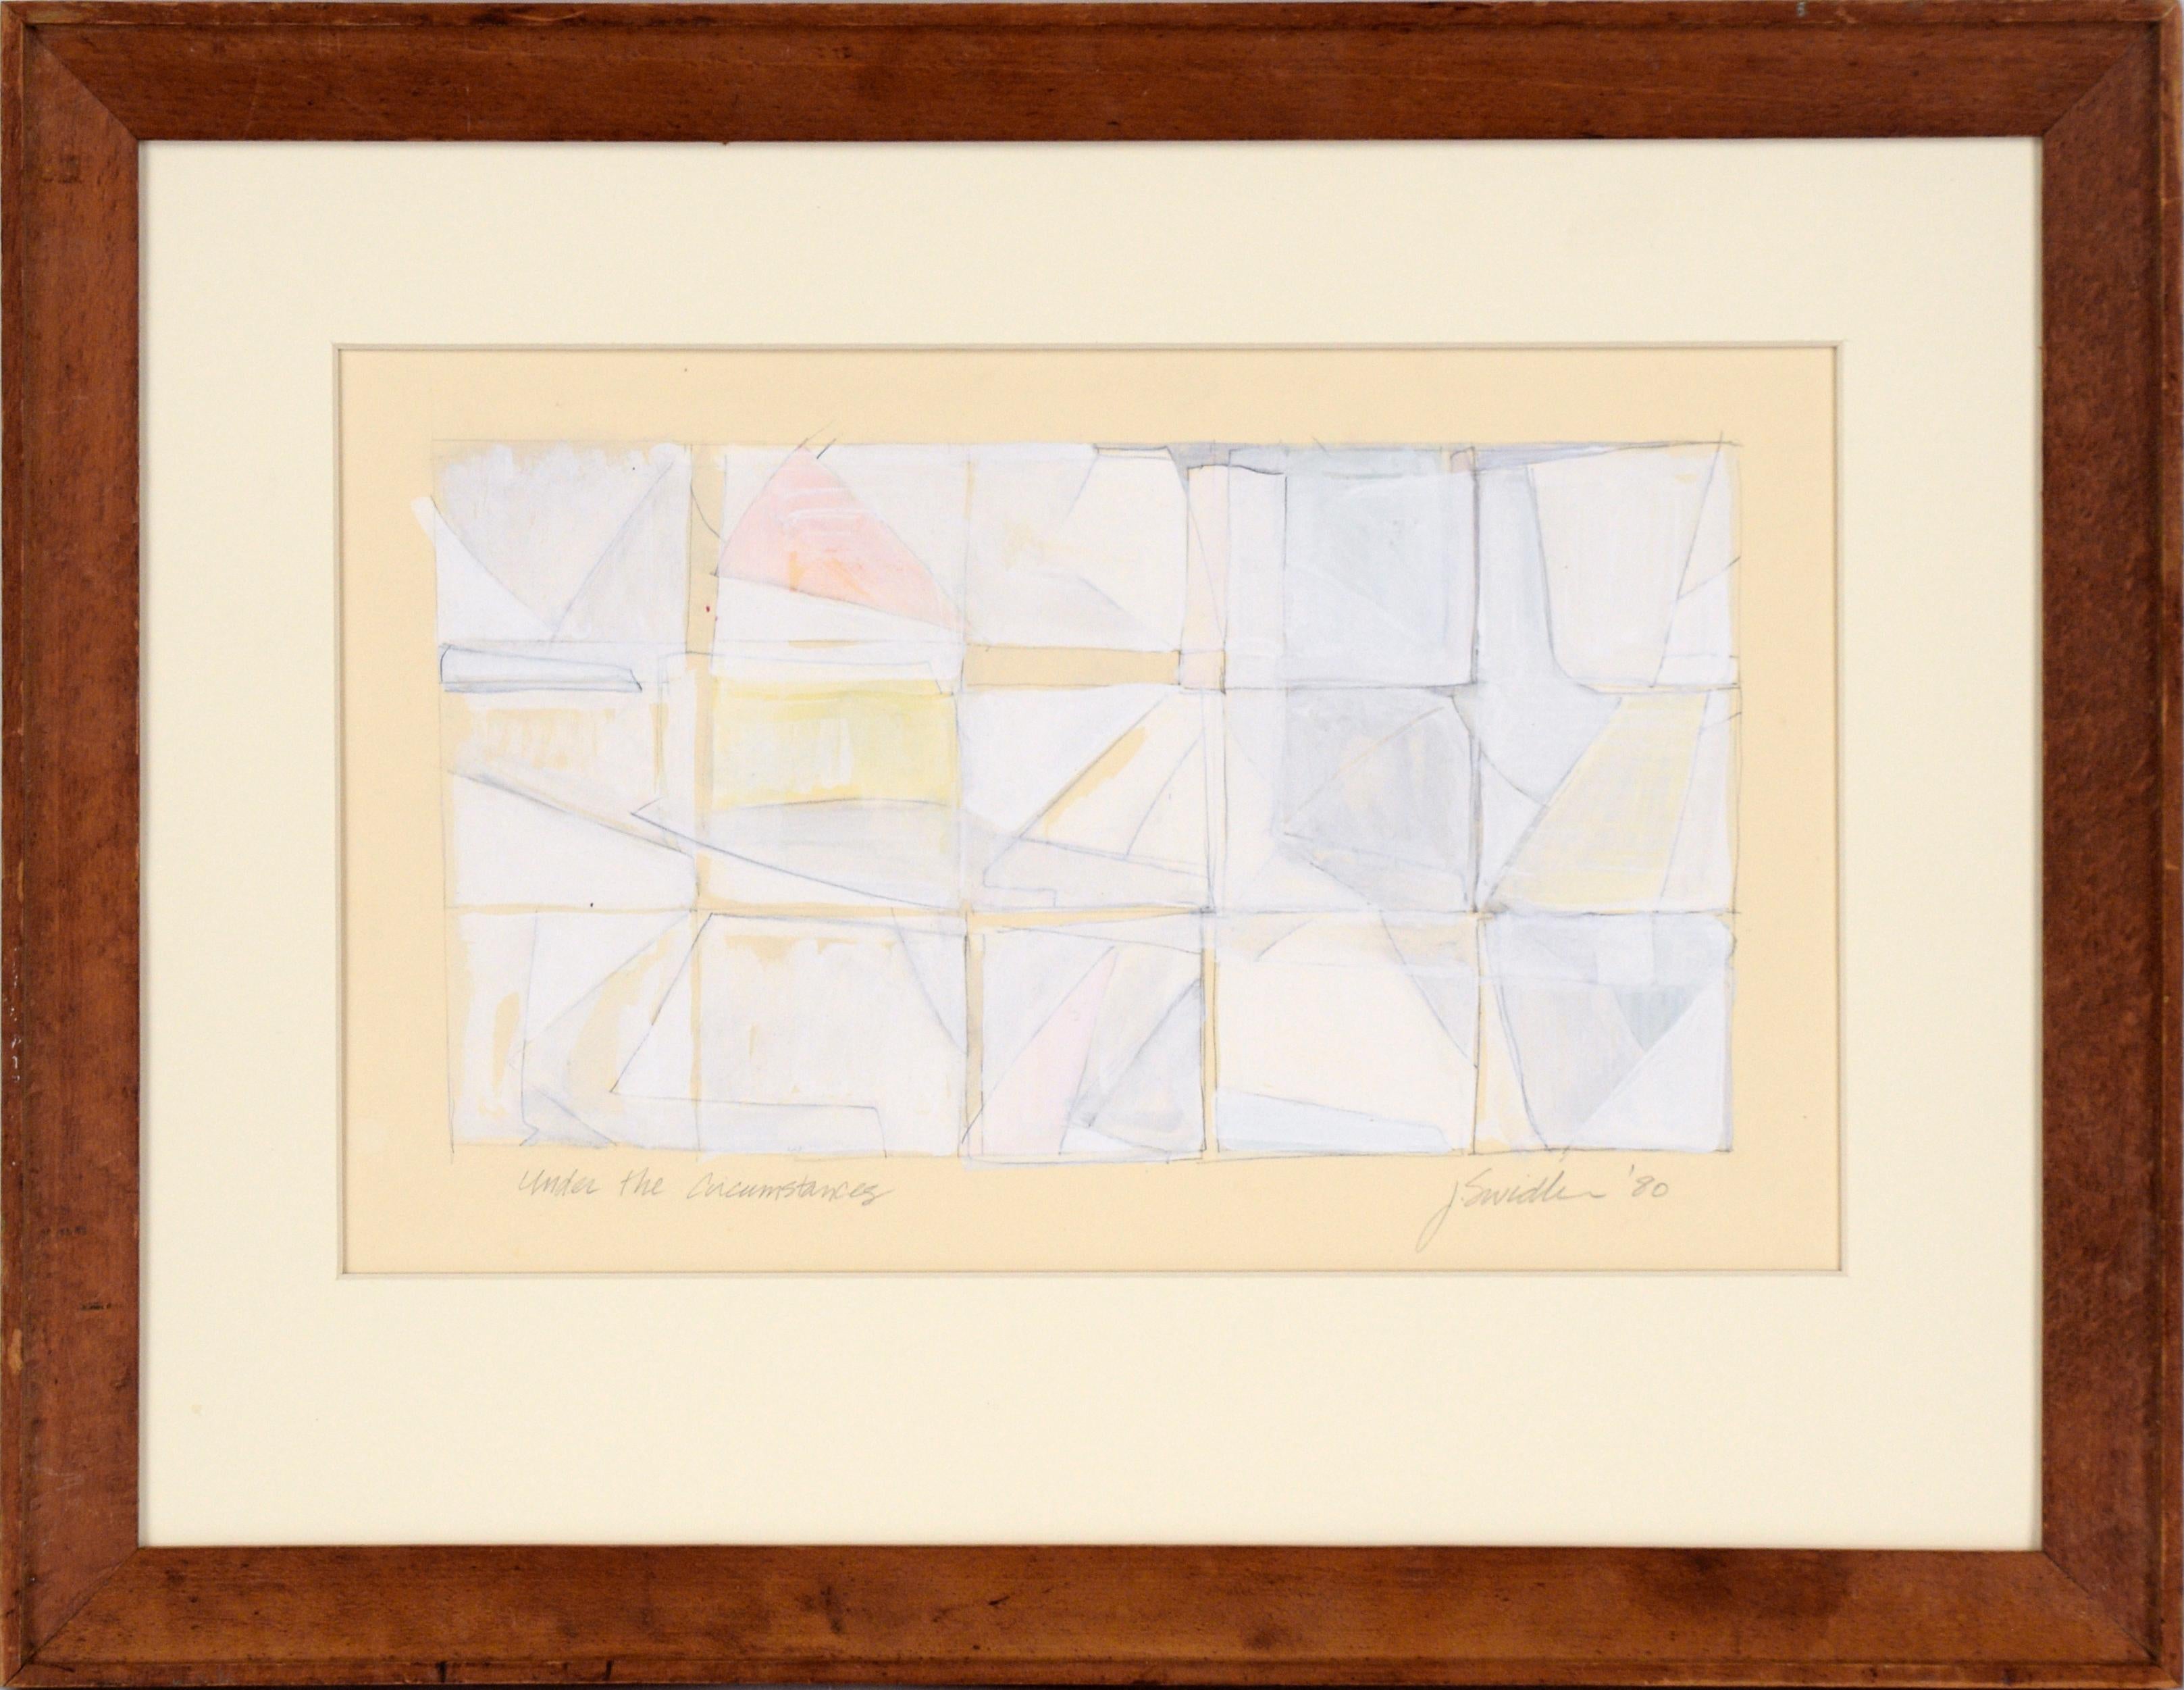 J. Swidler Abstract Painting - "Under the Circumstances" - Abstract Geometric Composition in Gouache on Paper